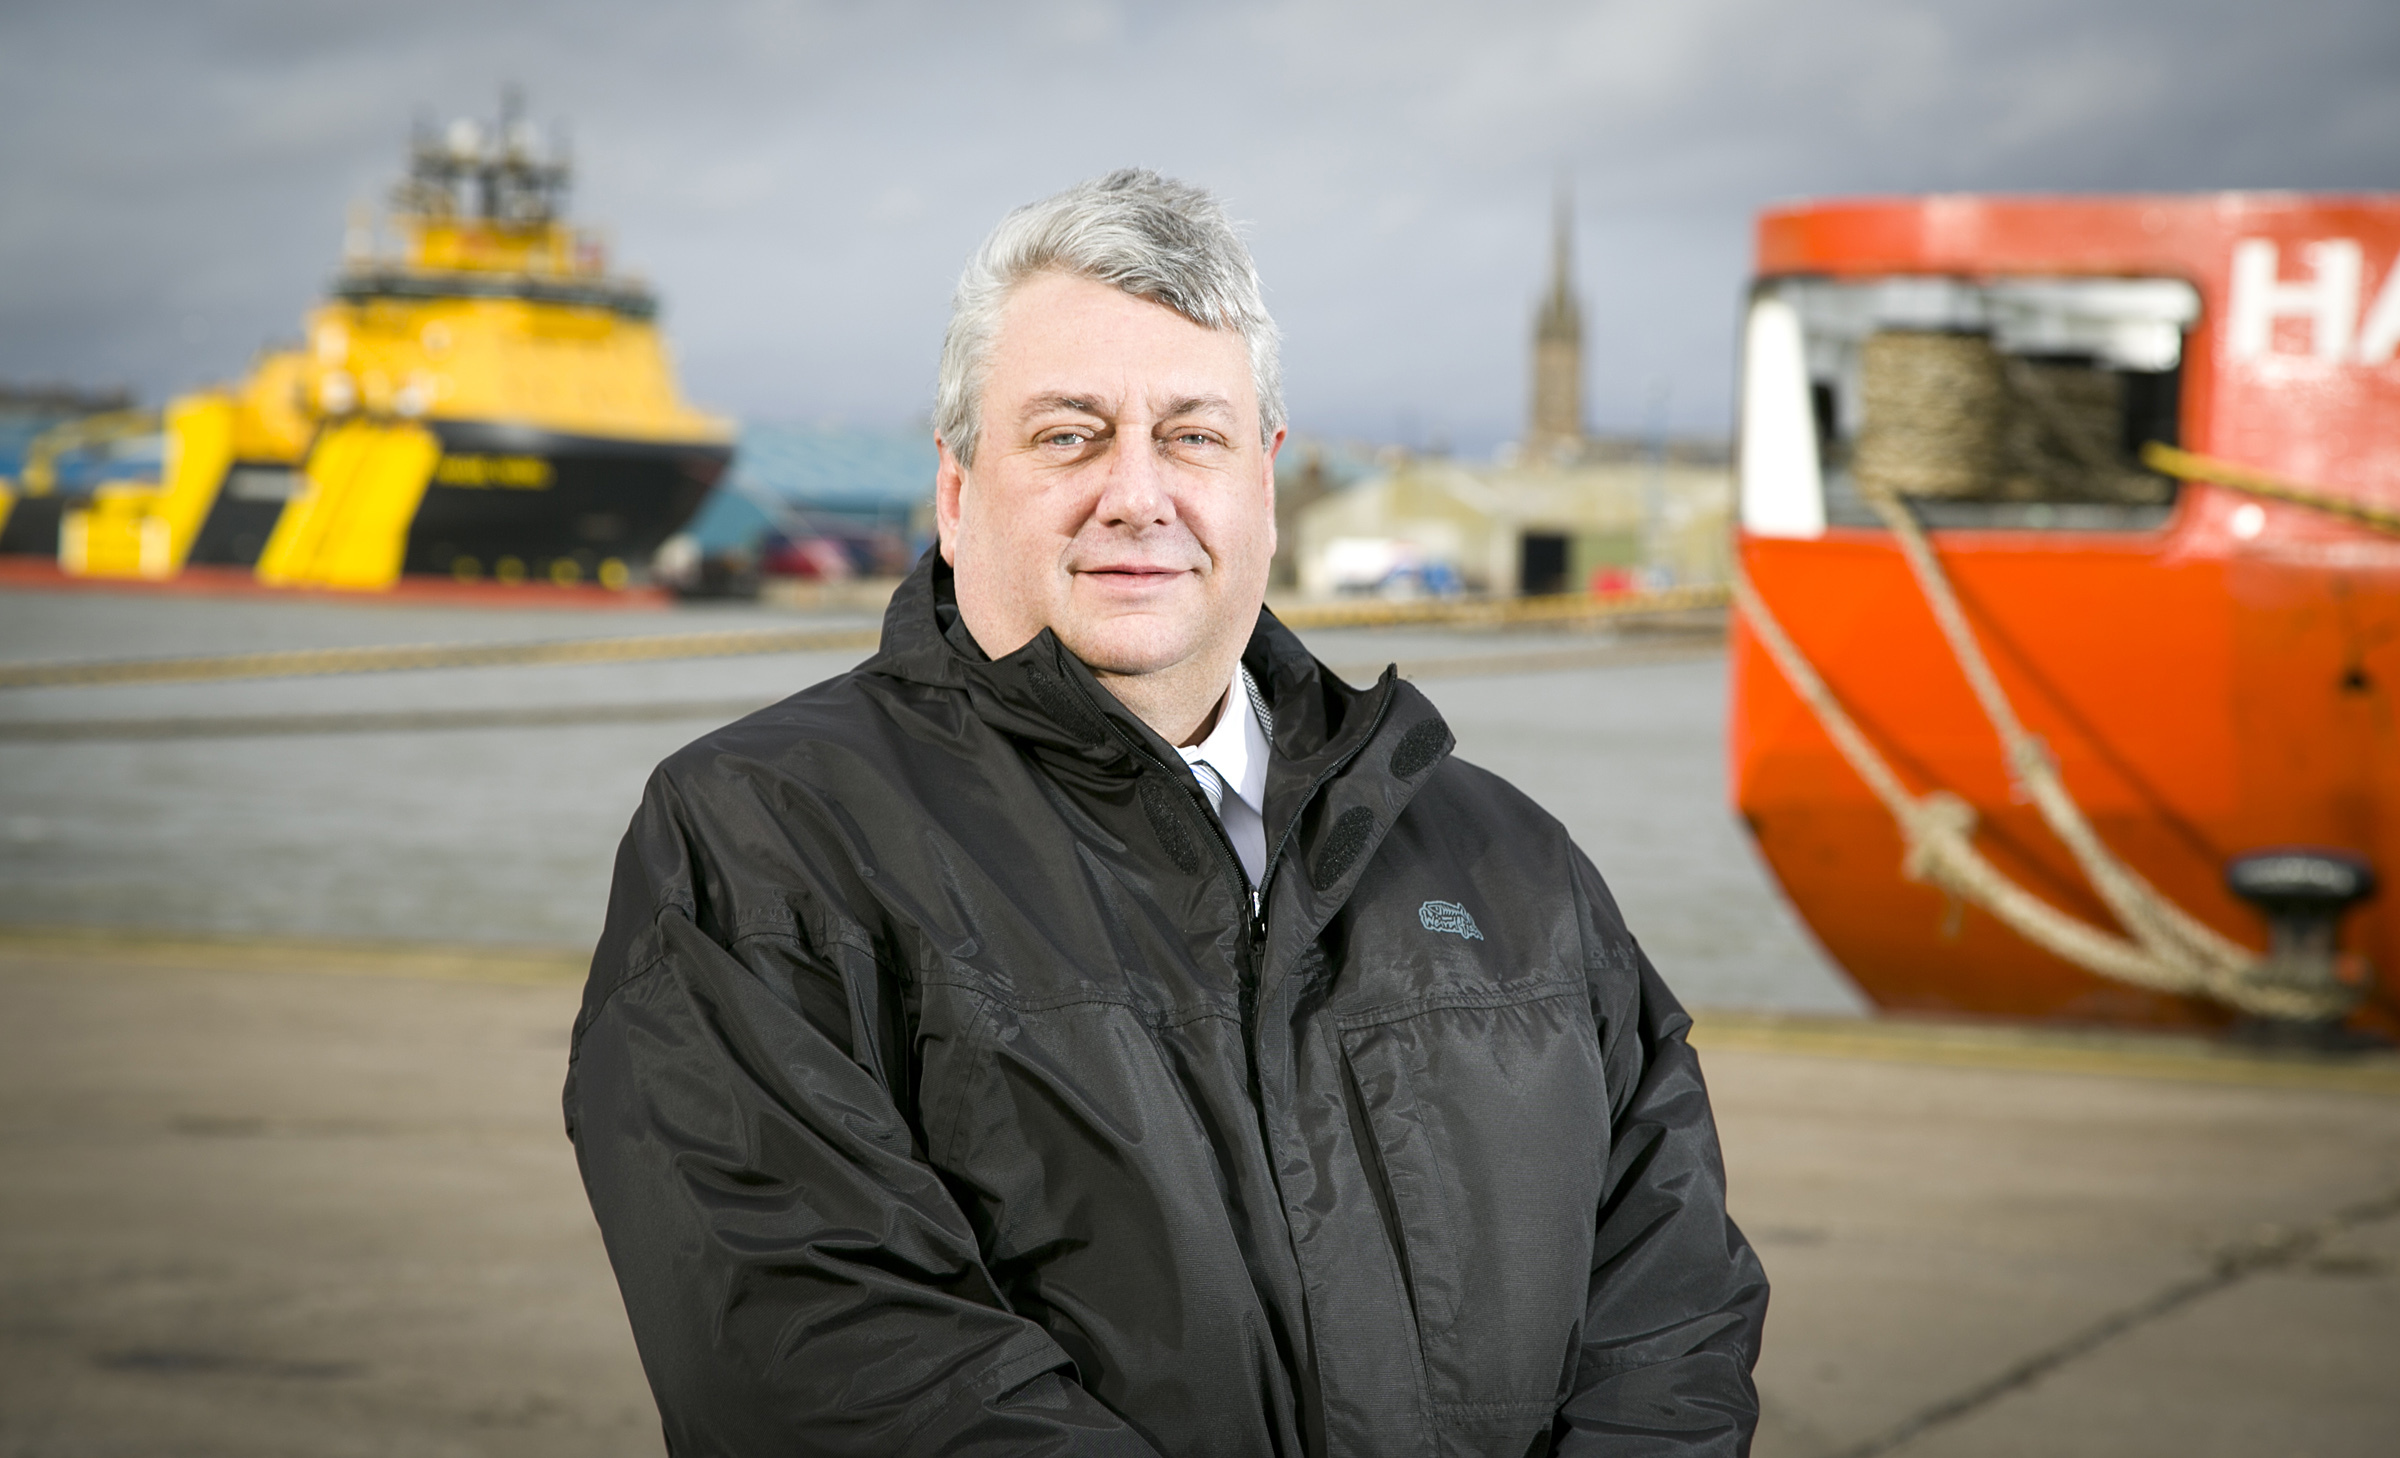 Dave Price, the chief exec of the International Well Control Forum